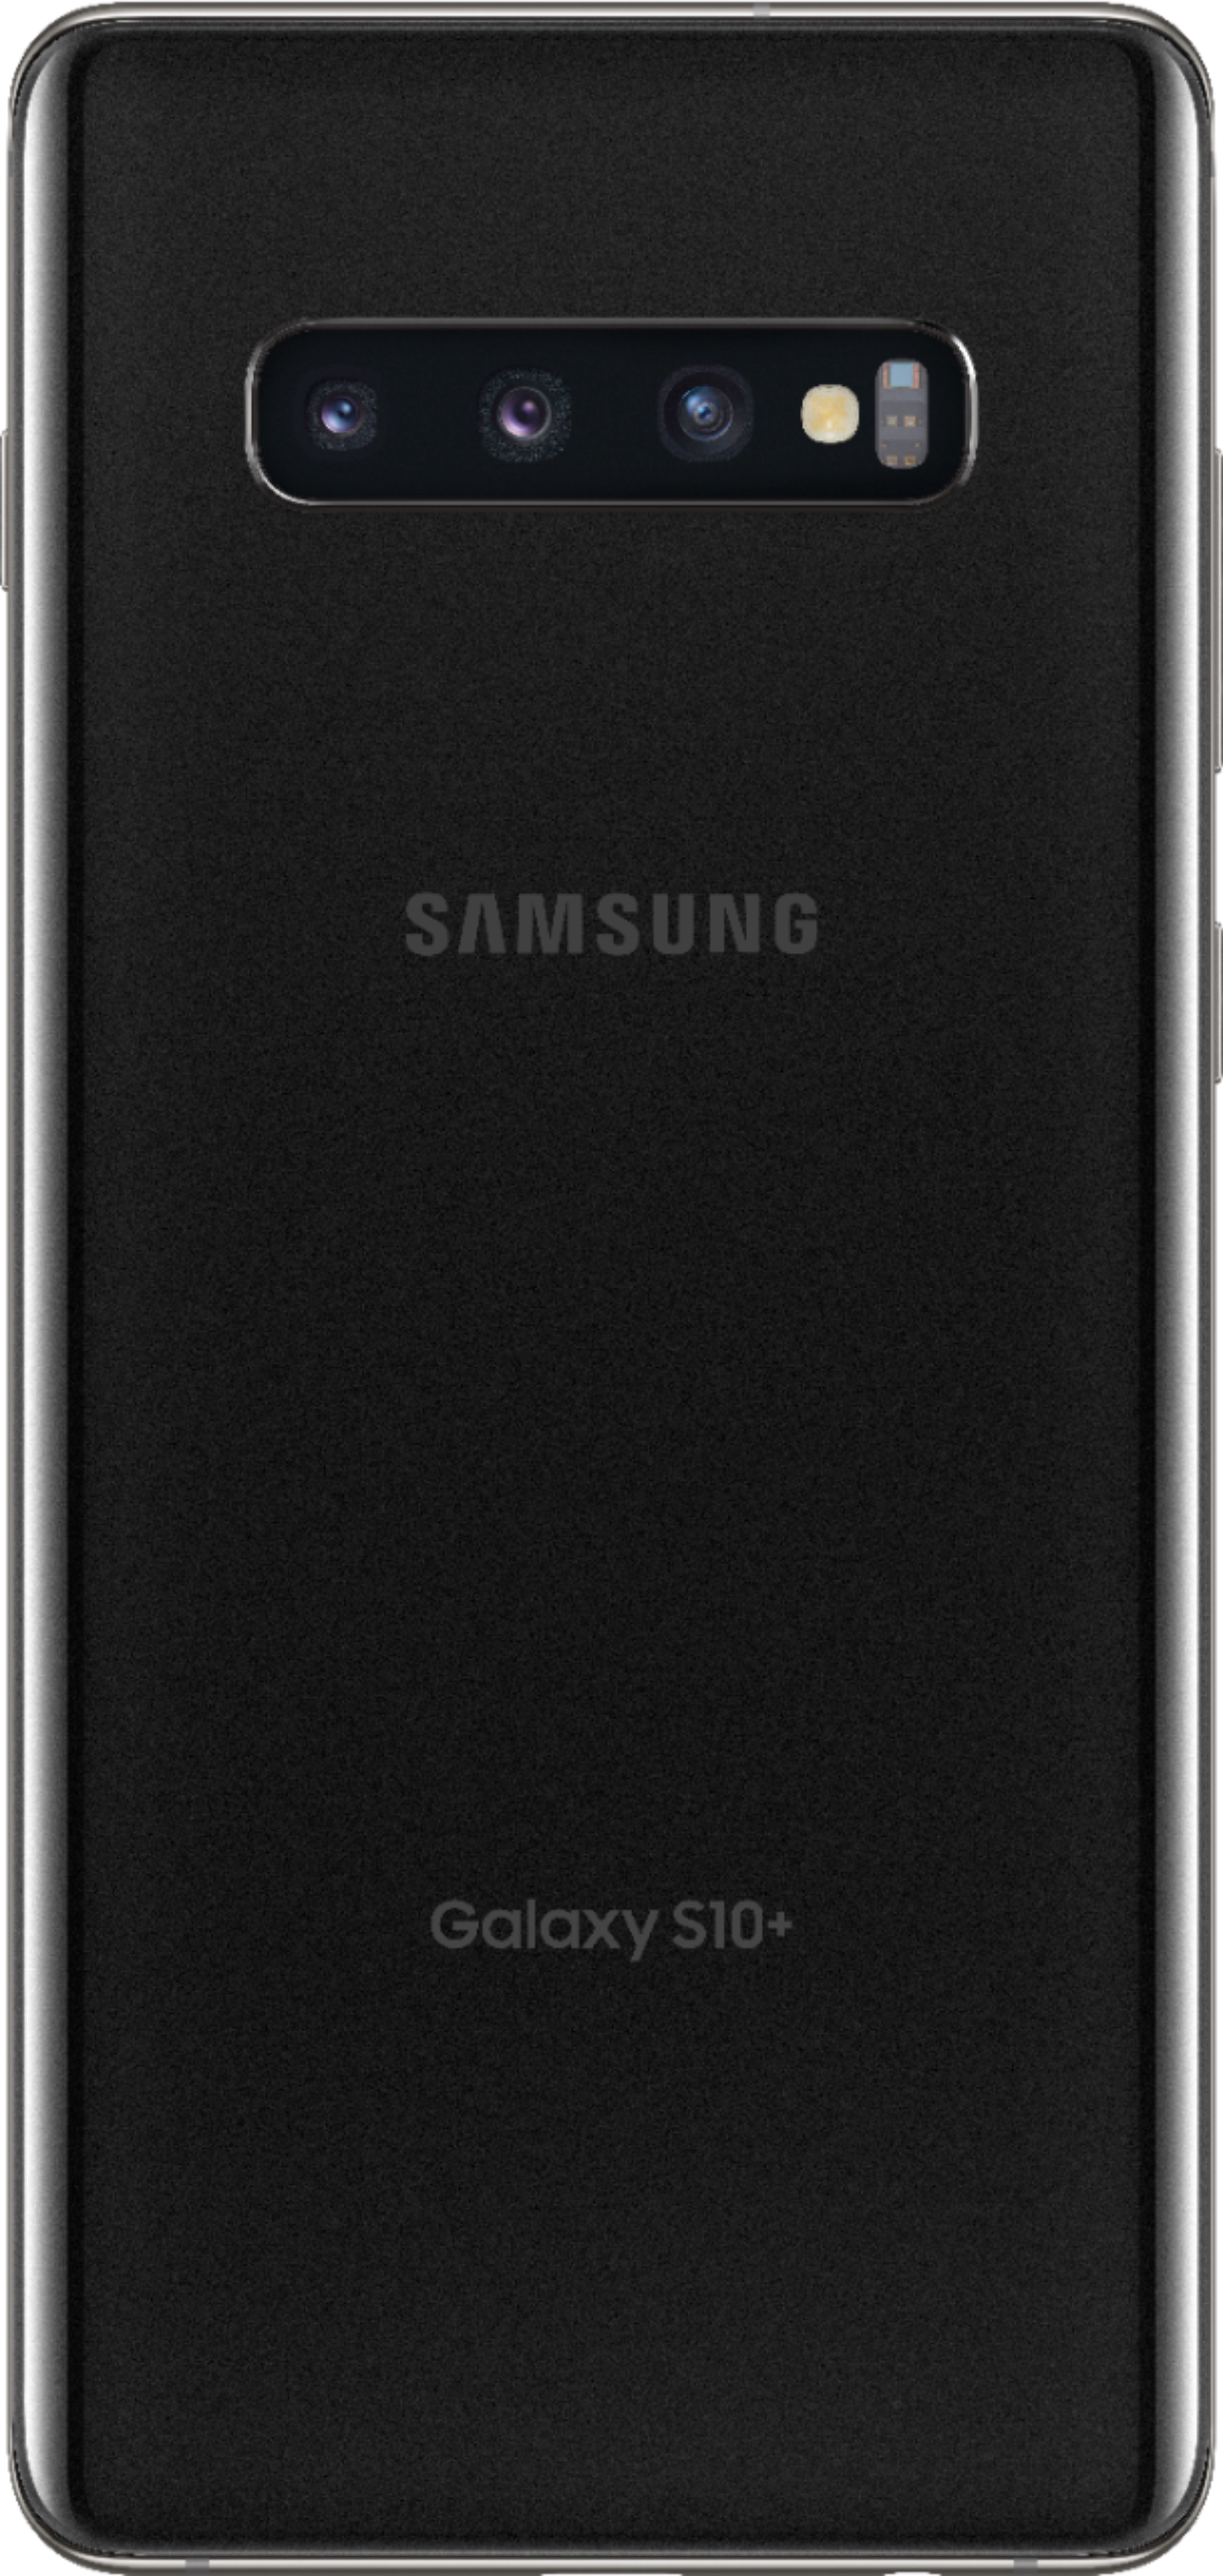 Back View: Total Wireless - Samsung Galaxy S10+ with 128GB Memory Prepaid Cell Phone - Black